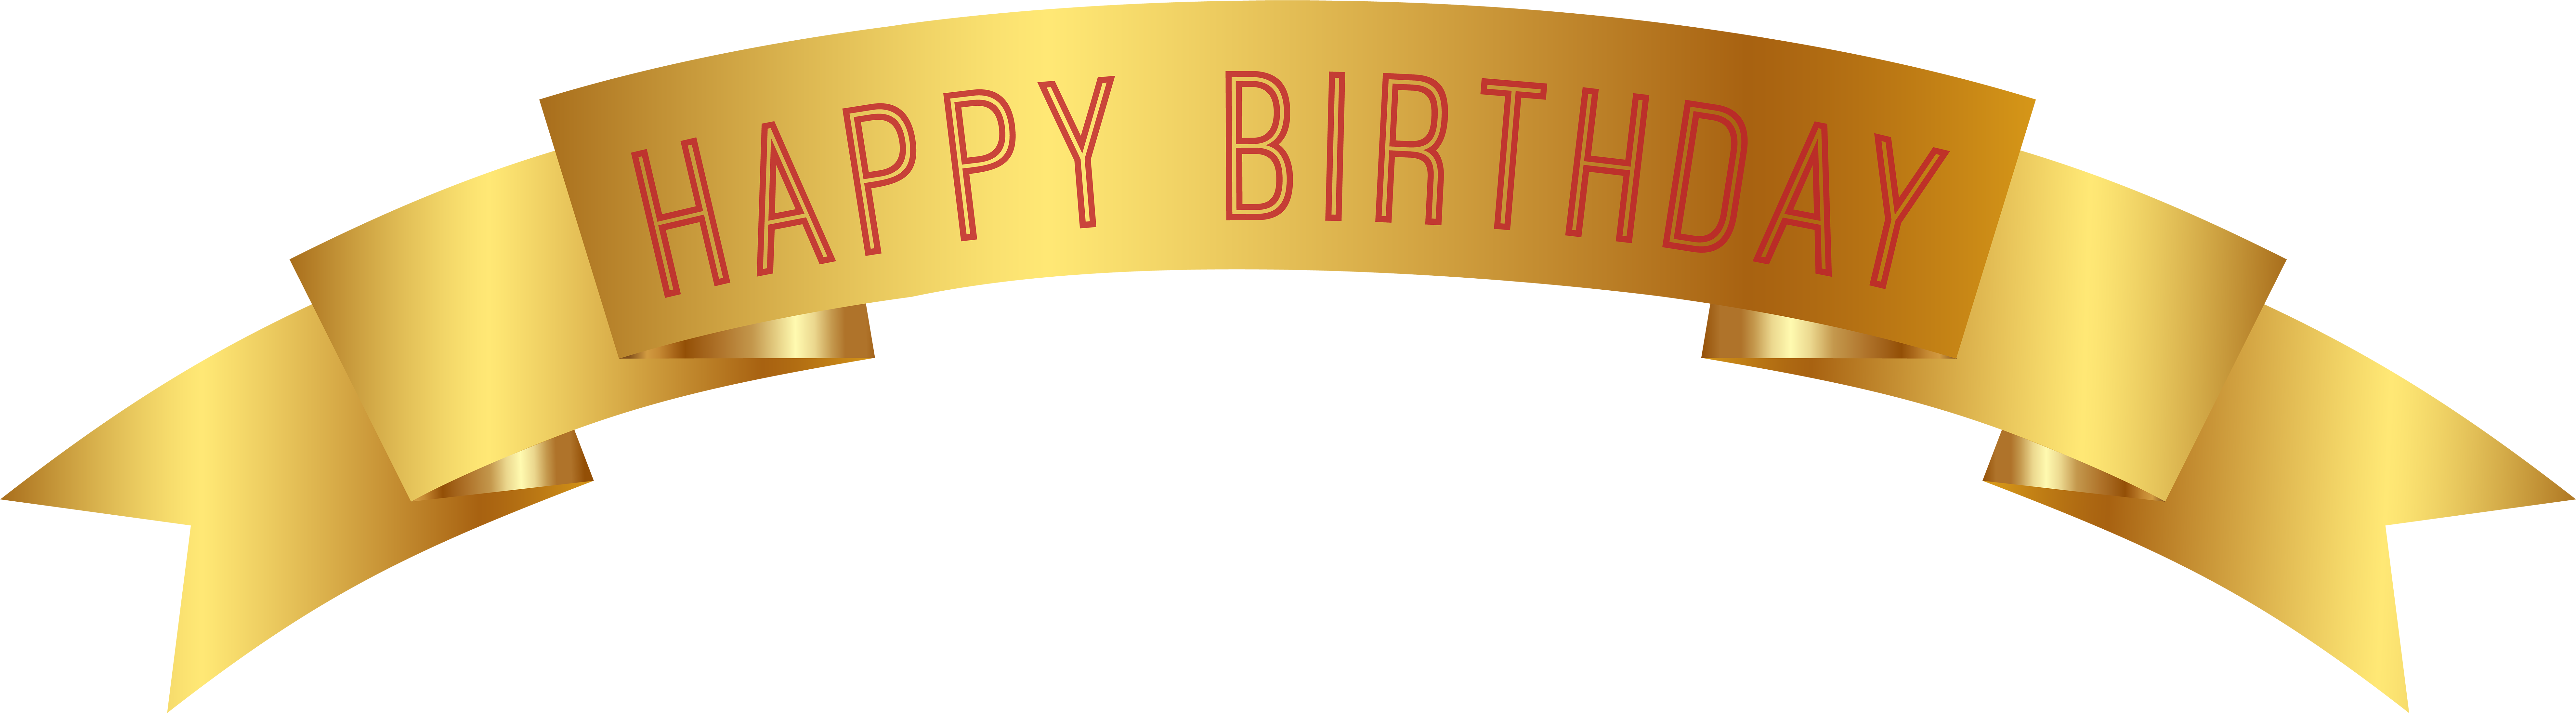 0 Result Images of Happy Birthday Banner Design Png - PNG Image Collection